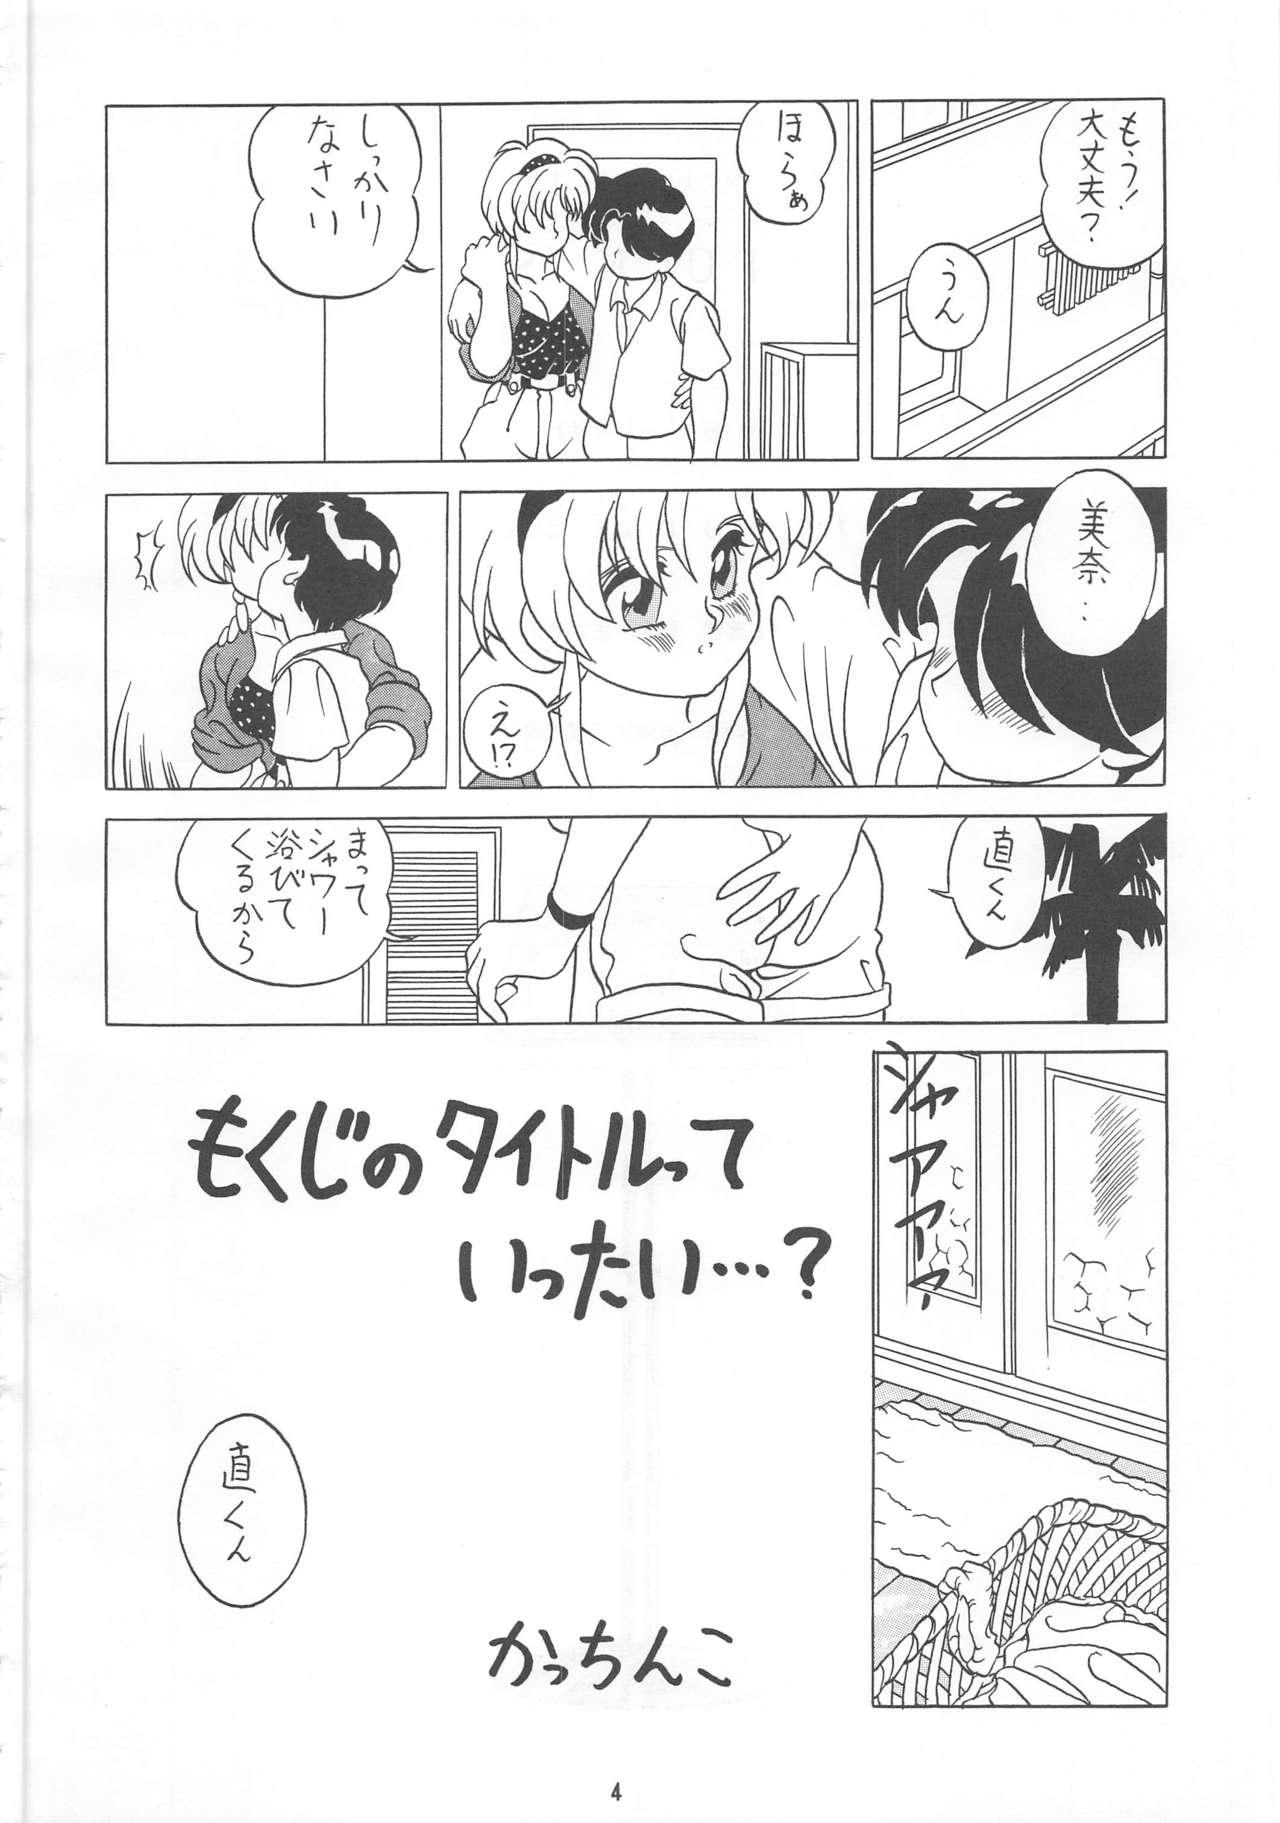 Family ONAPET MASTER - Sailor moon Picked Up - Page 4